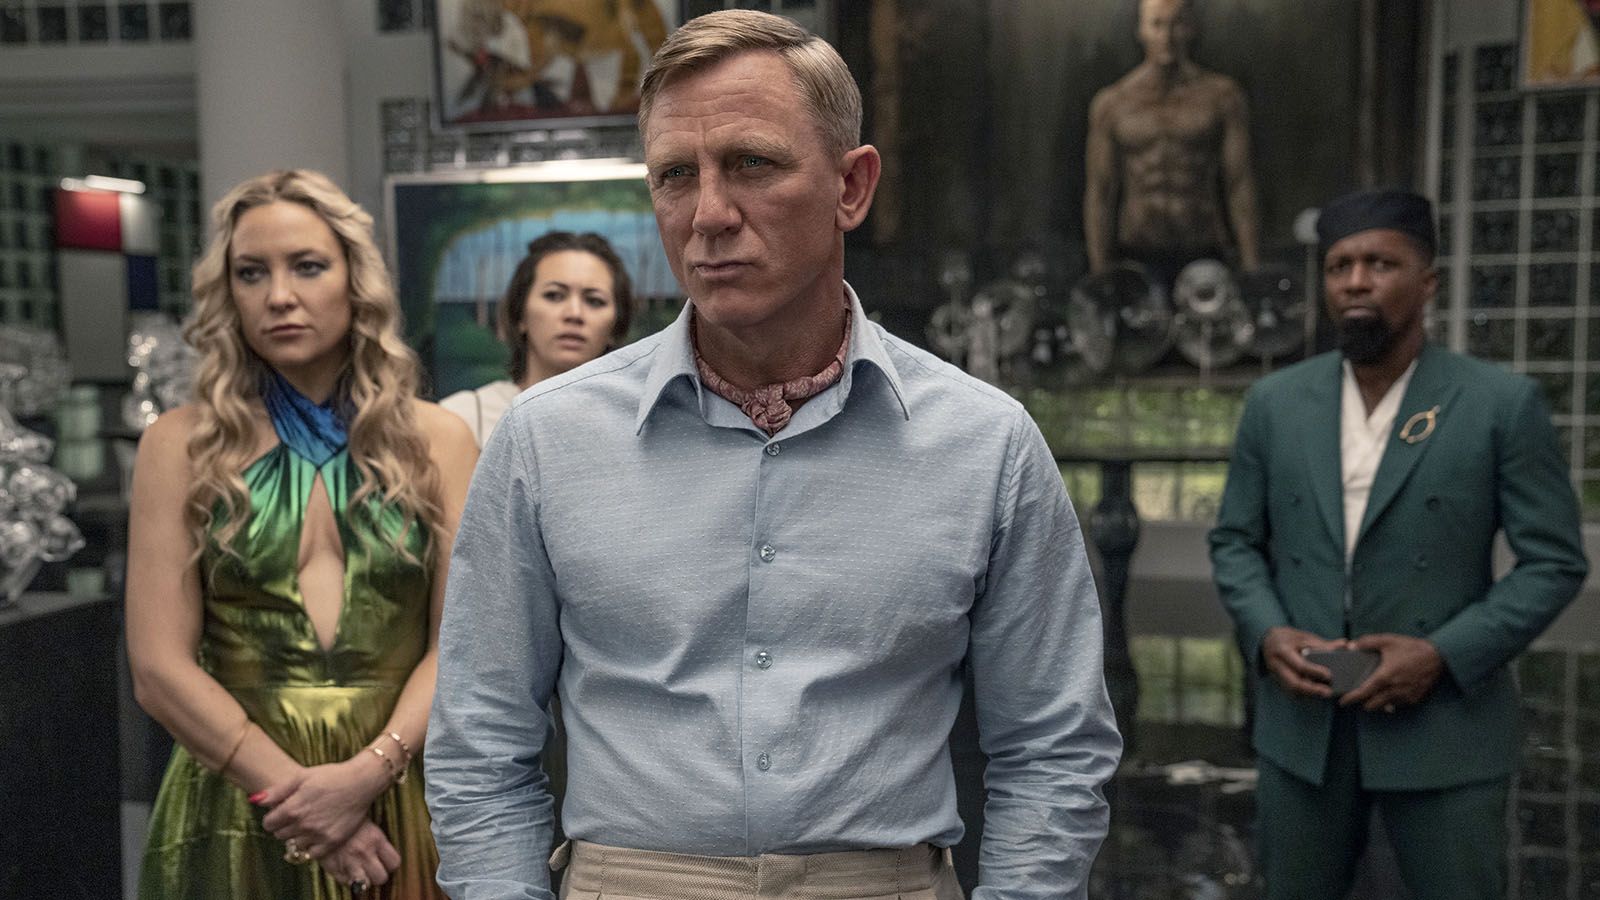 Daniel Craig reprises his role as Benoit Blanc in Rian Johnson’s Glass Onion: A Knives Out Mystery.